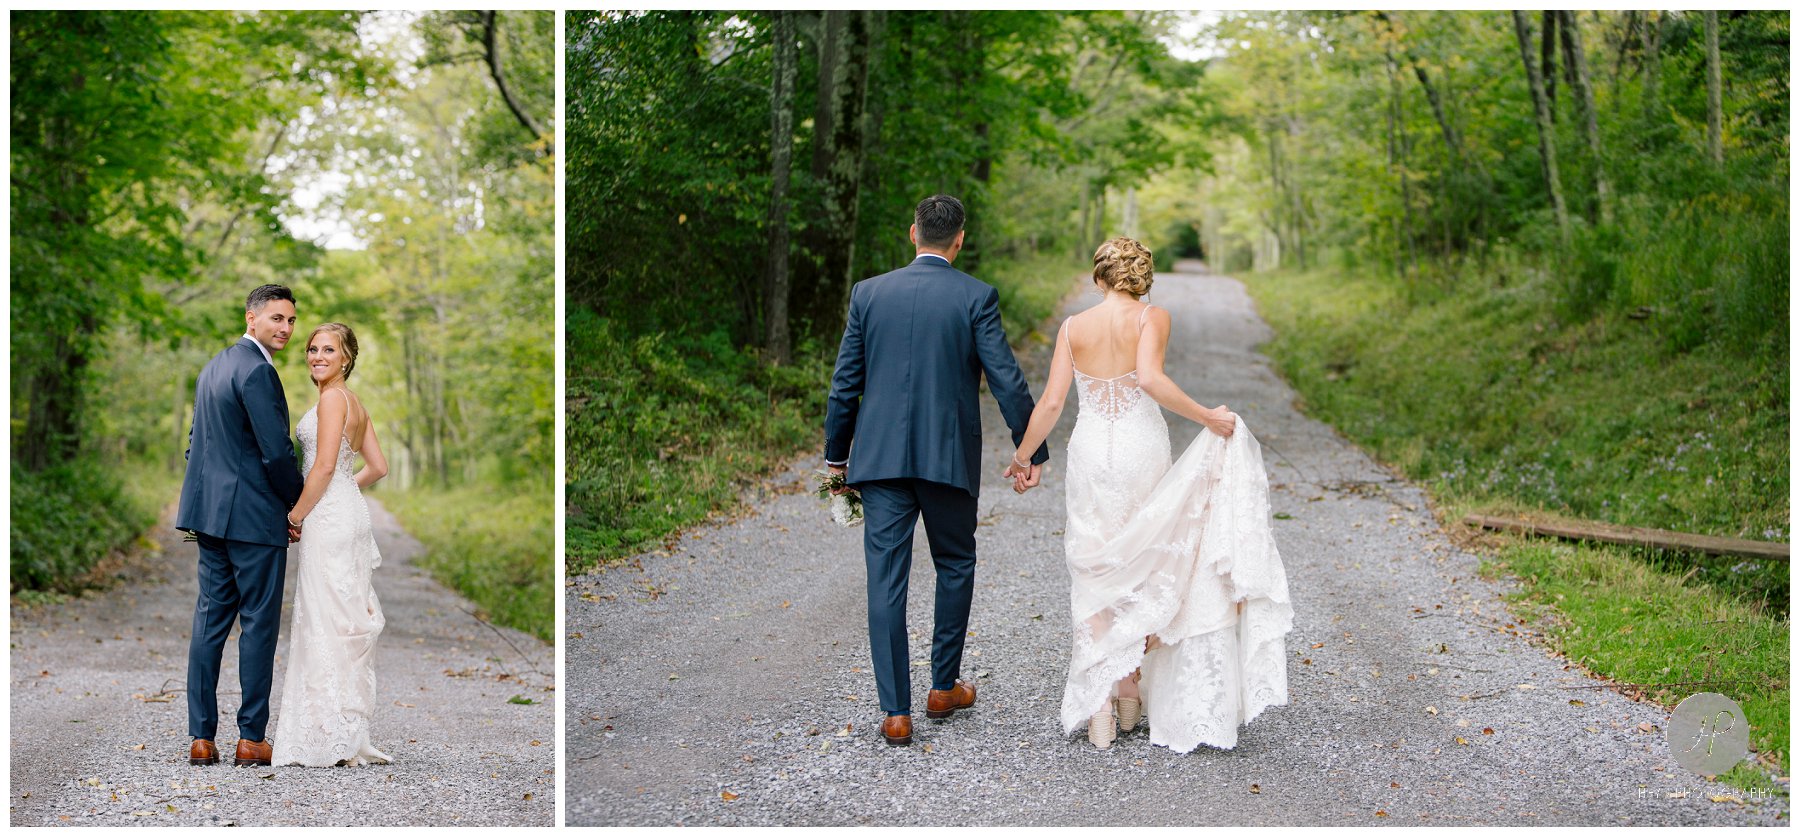 bride and groom walking on dirt road at stone tavern farm wedding in the catskills new york